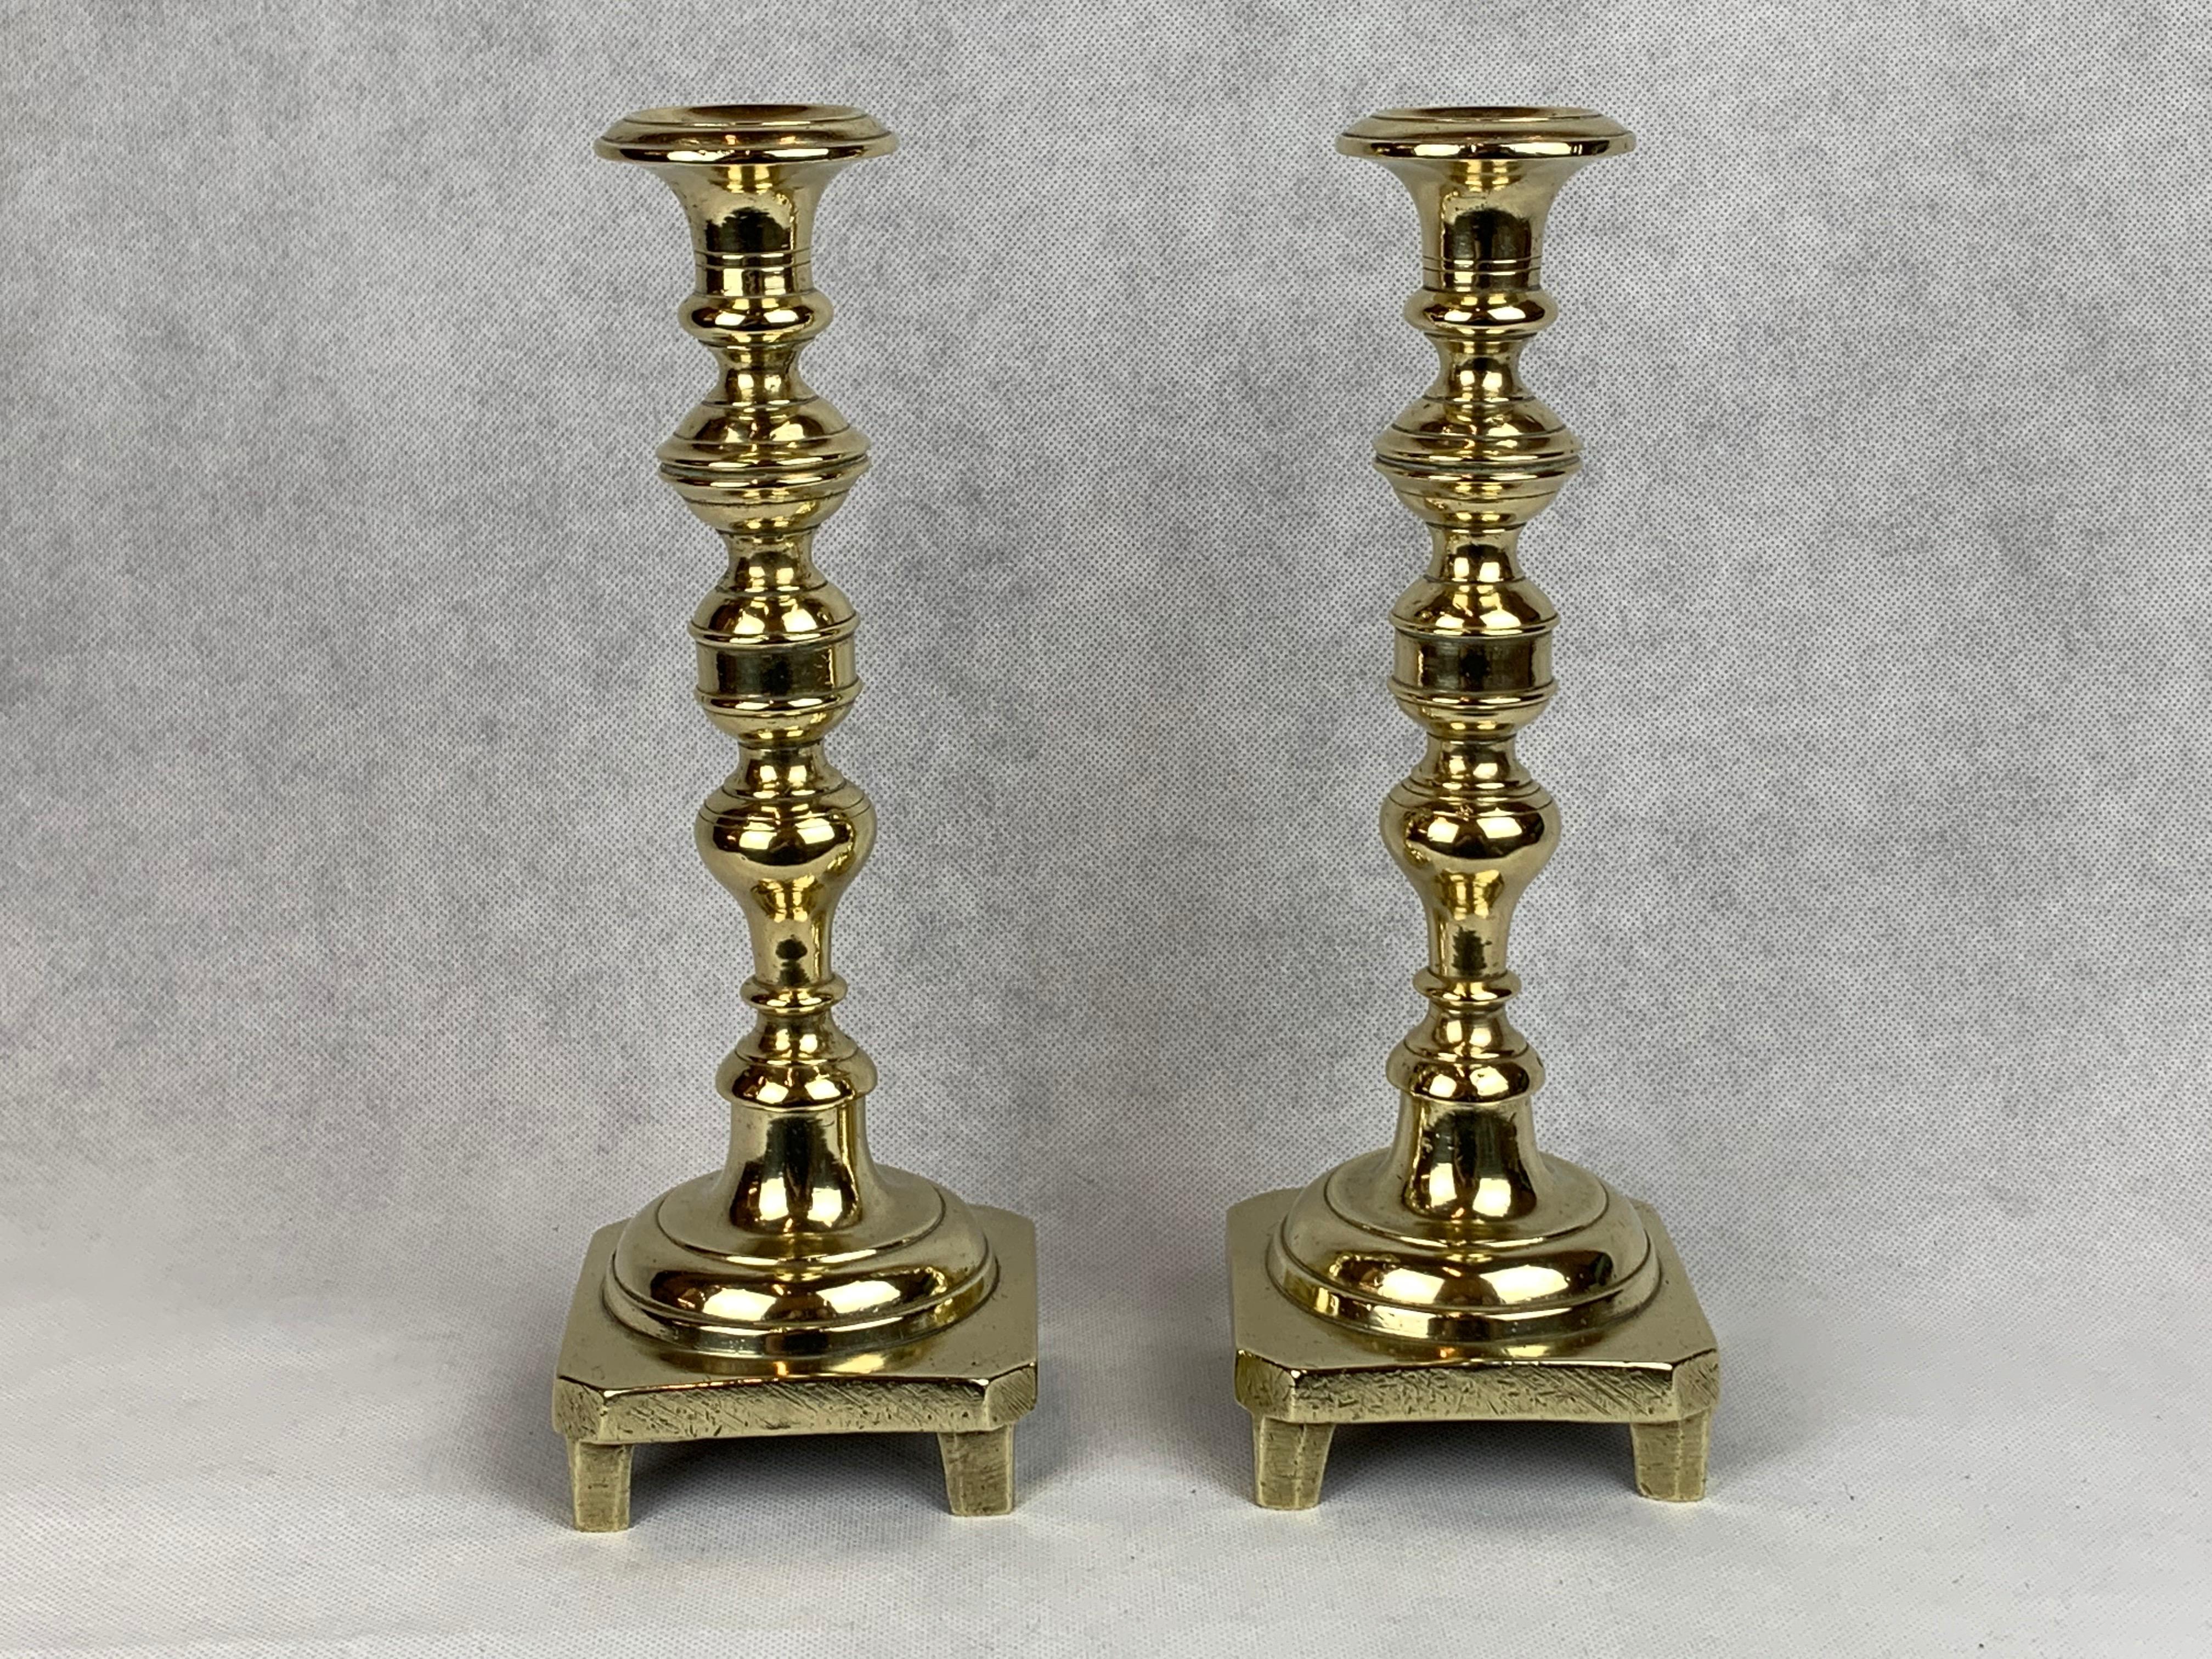 Other A Pair of Solid Brass Footed Candlesticks with Square Bases, Russia, 19th c. For Sale